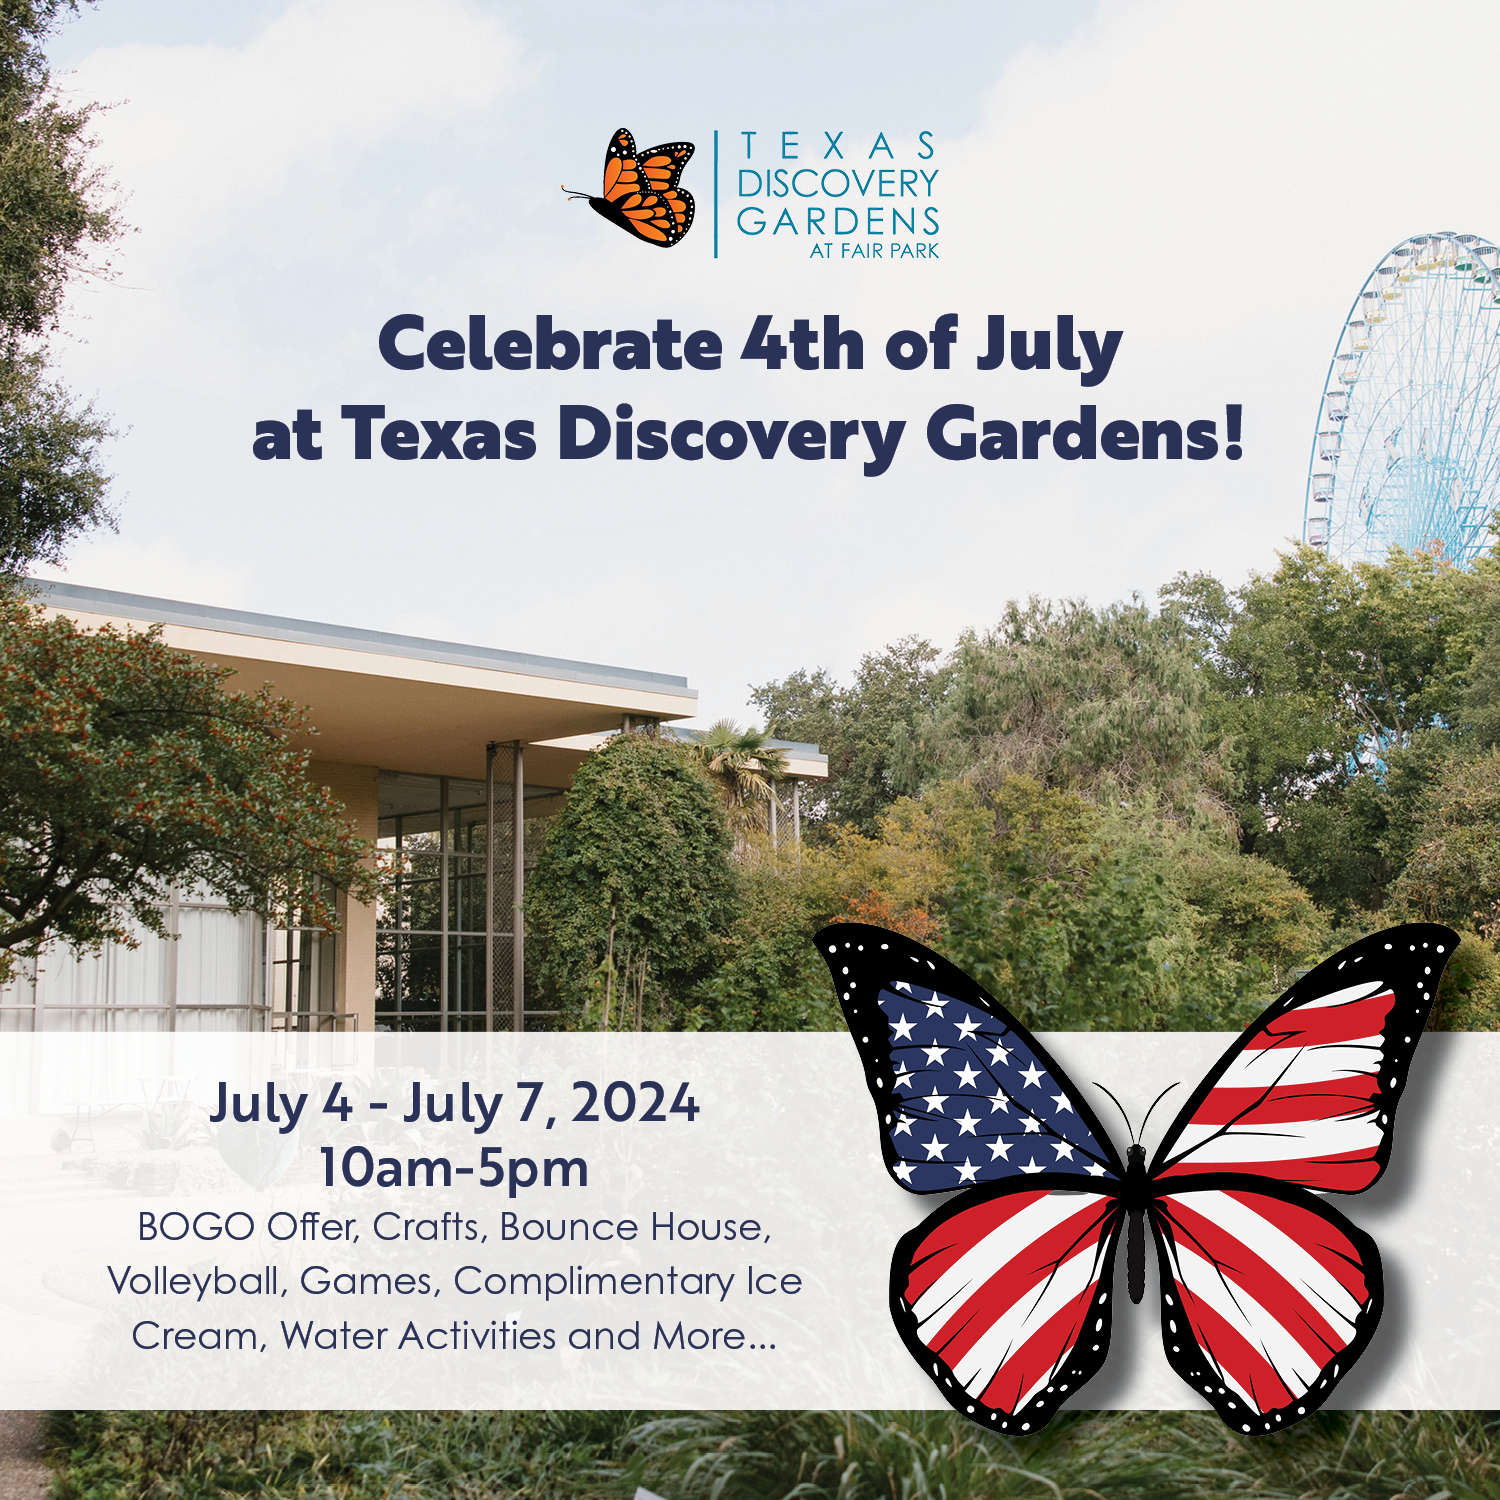 Celebrate 4th of July at TDG!